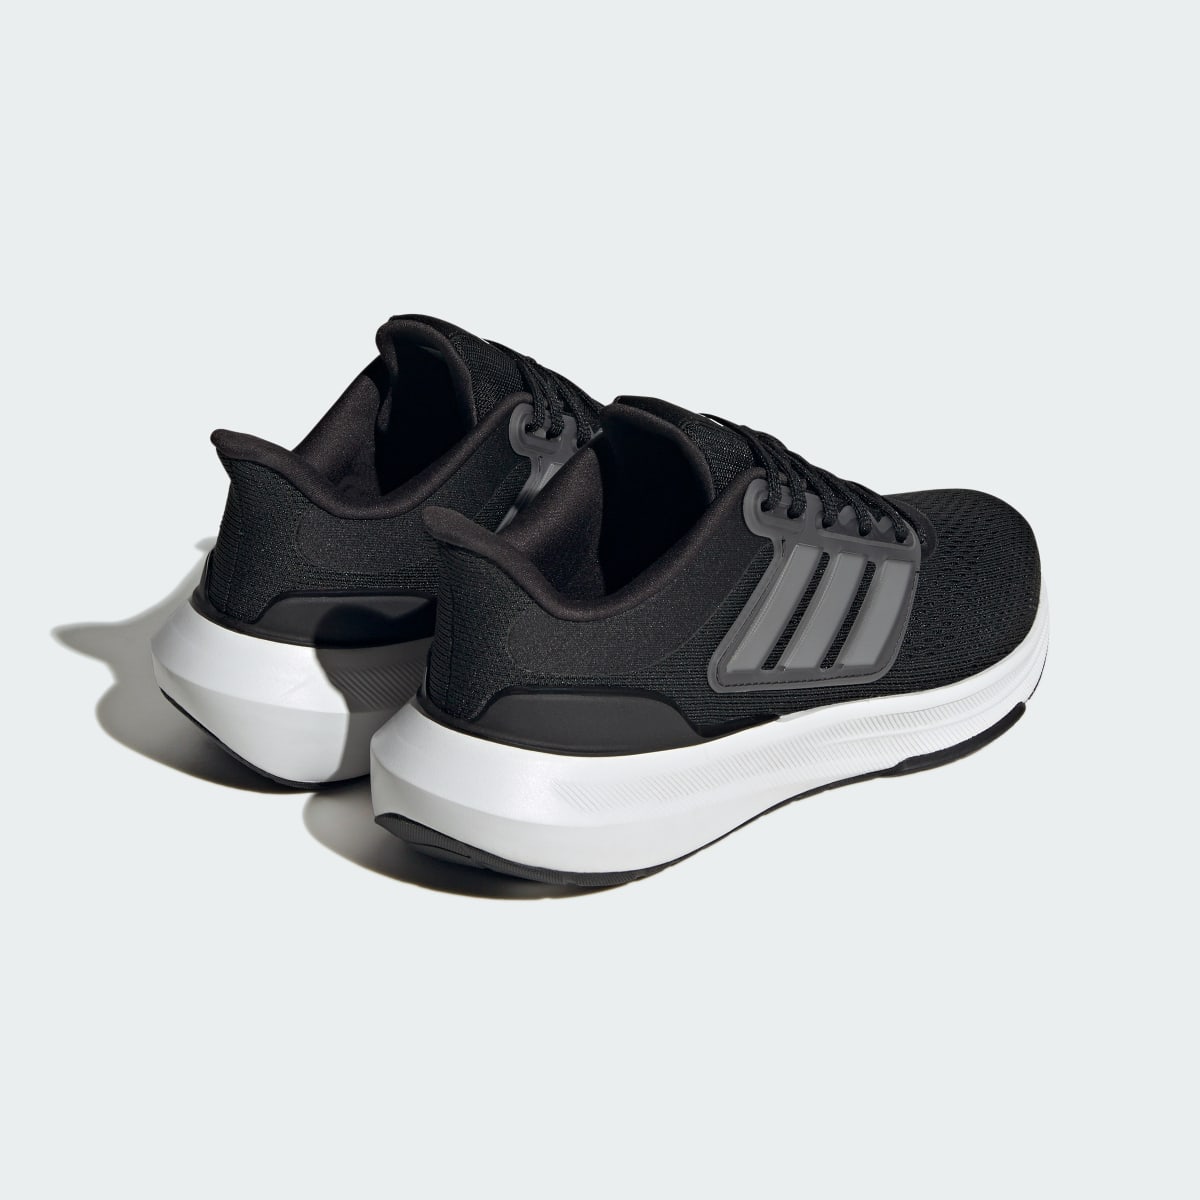 Adidas Ultrabounce Wide Running Shoes. 8